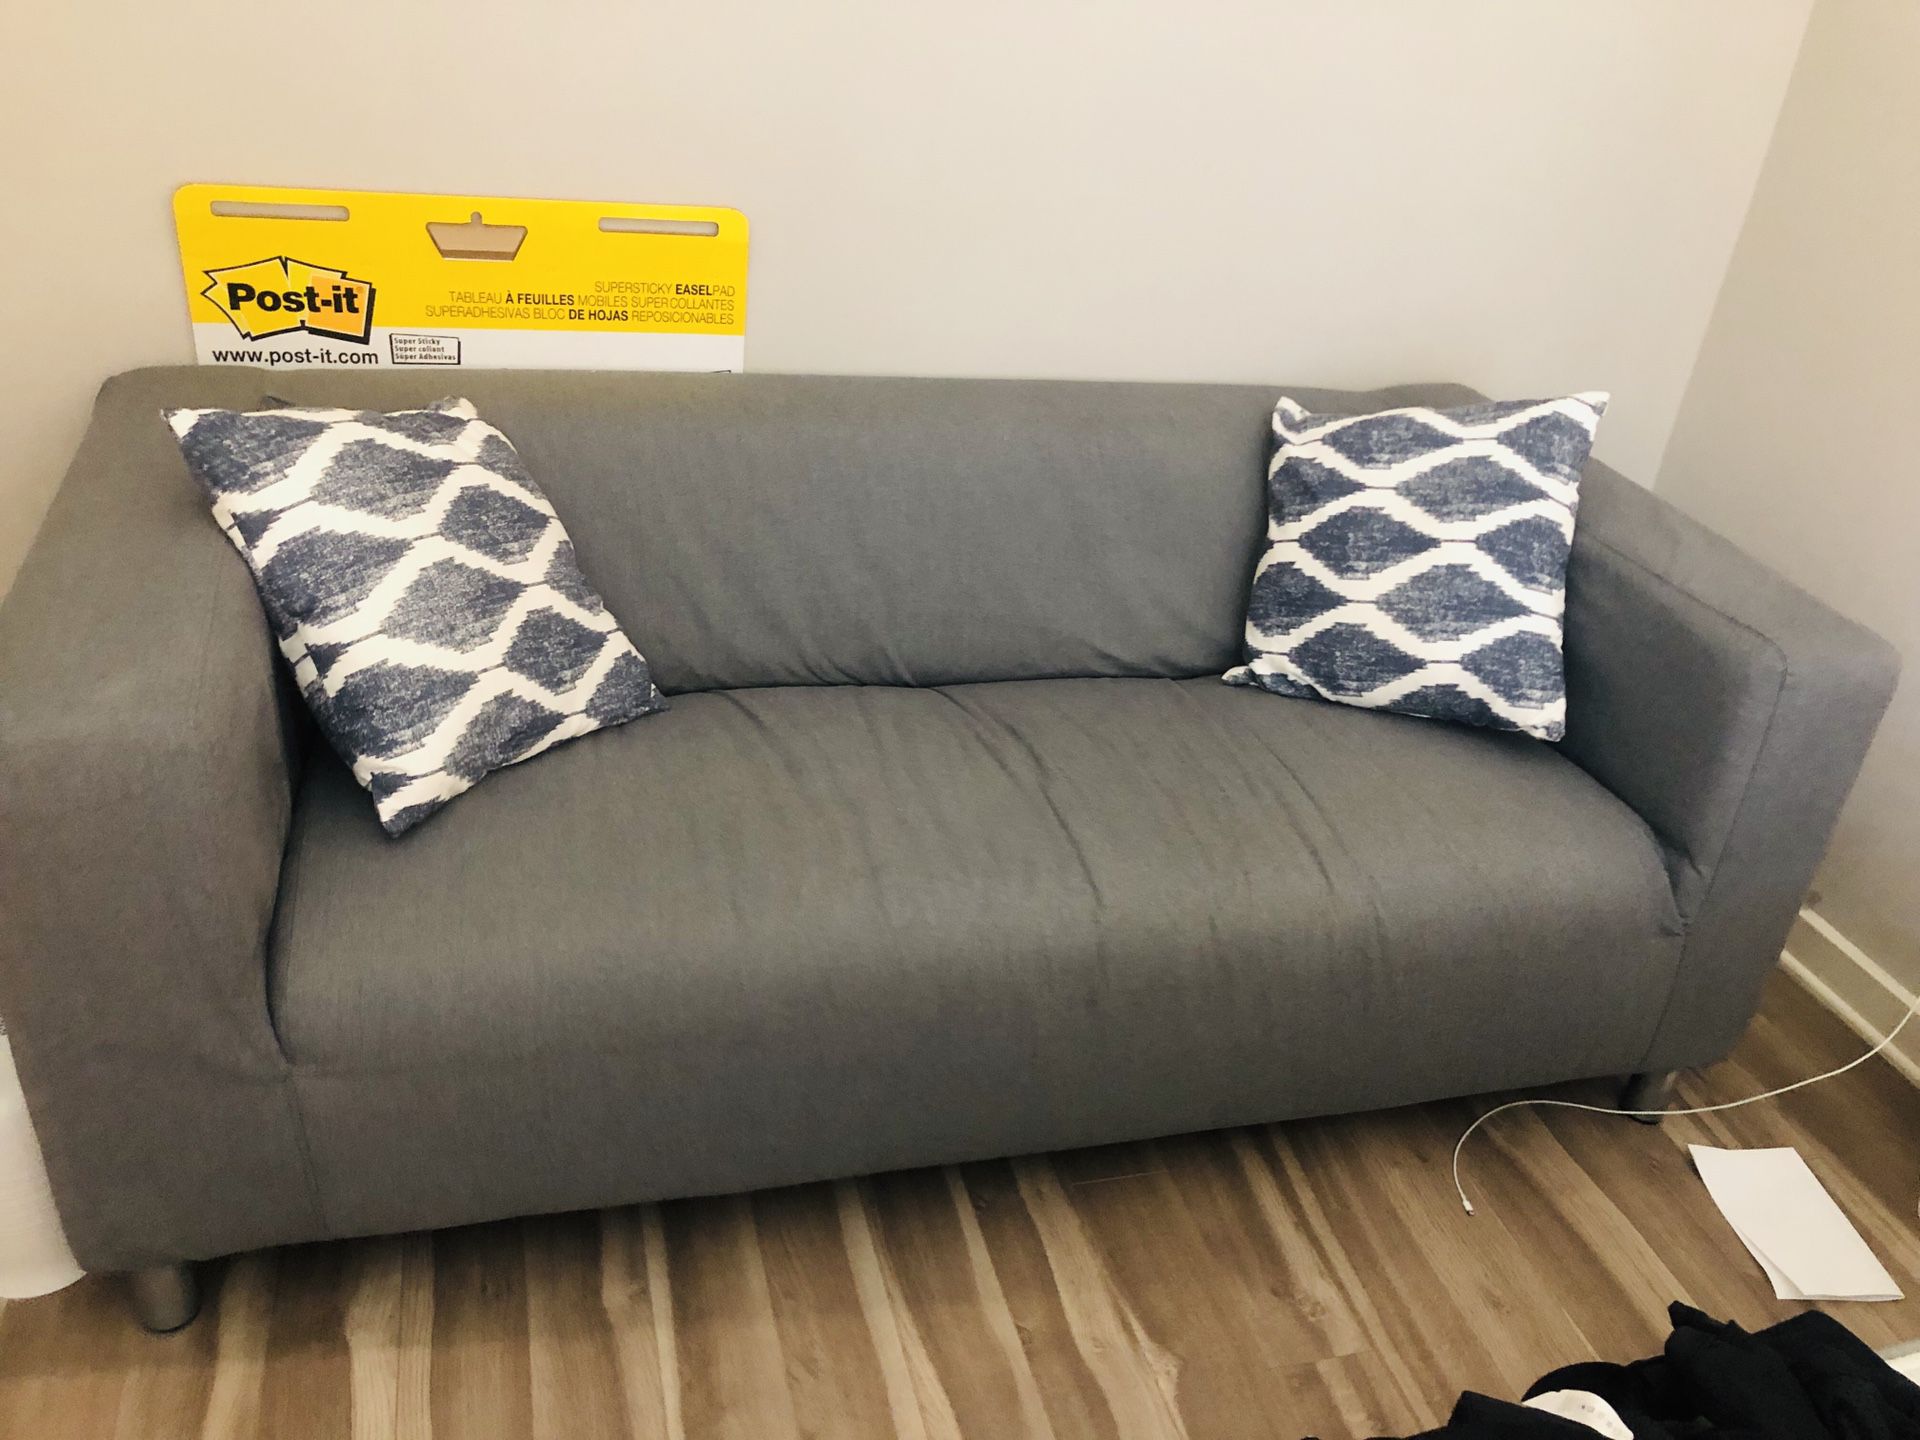 SELLING ASAP - Comfy, Chic Couch